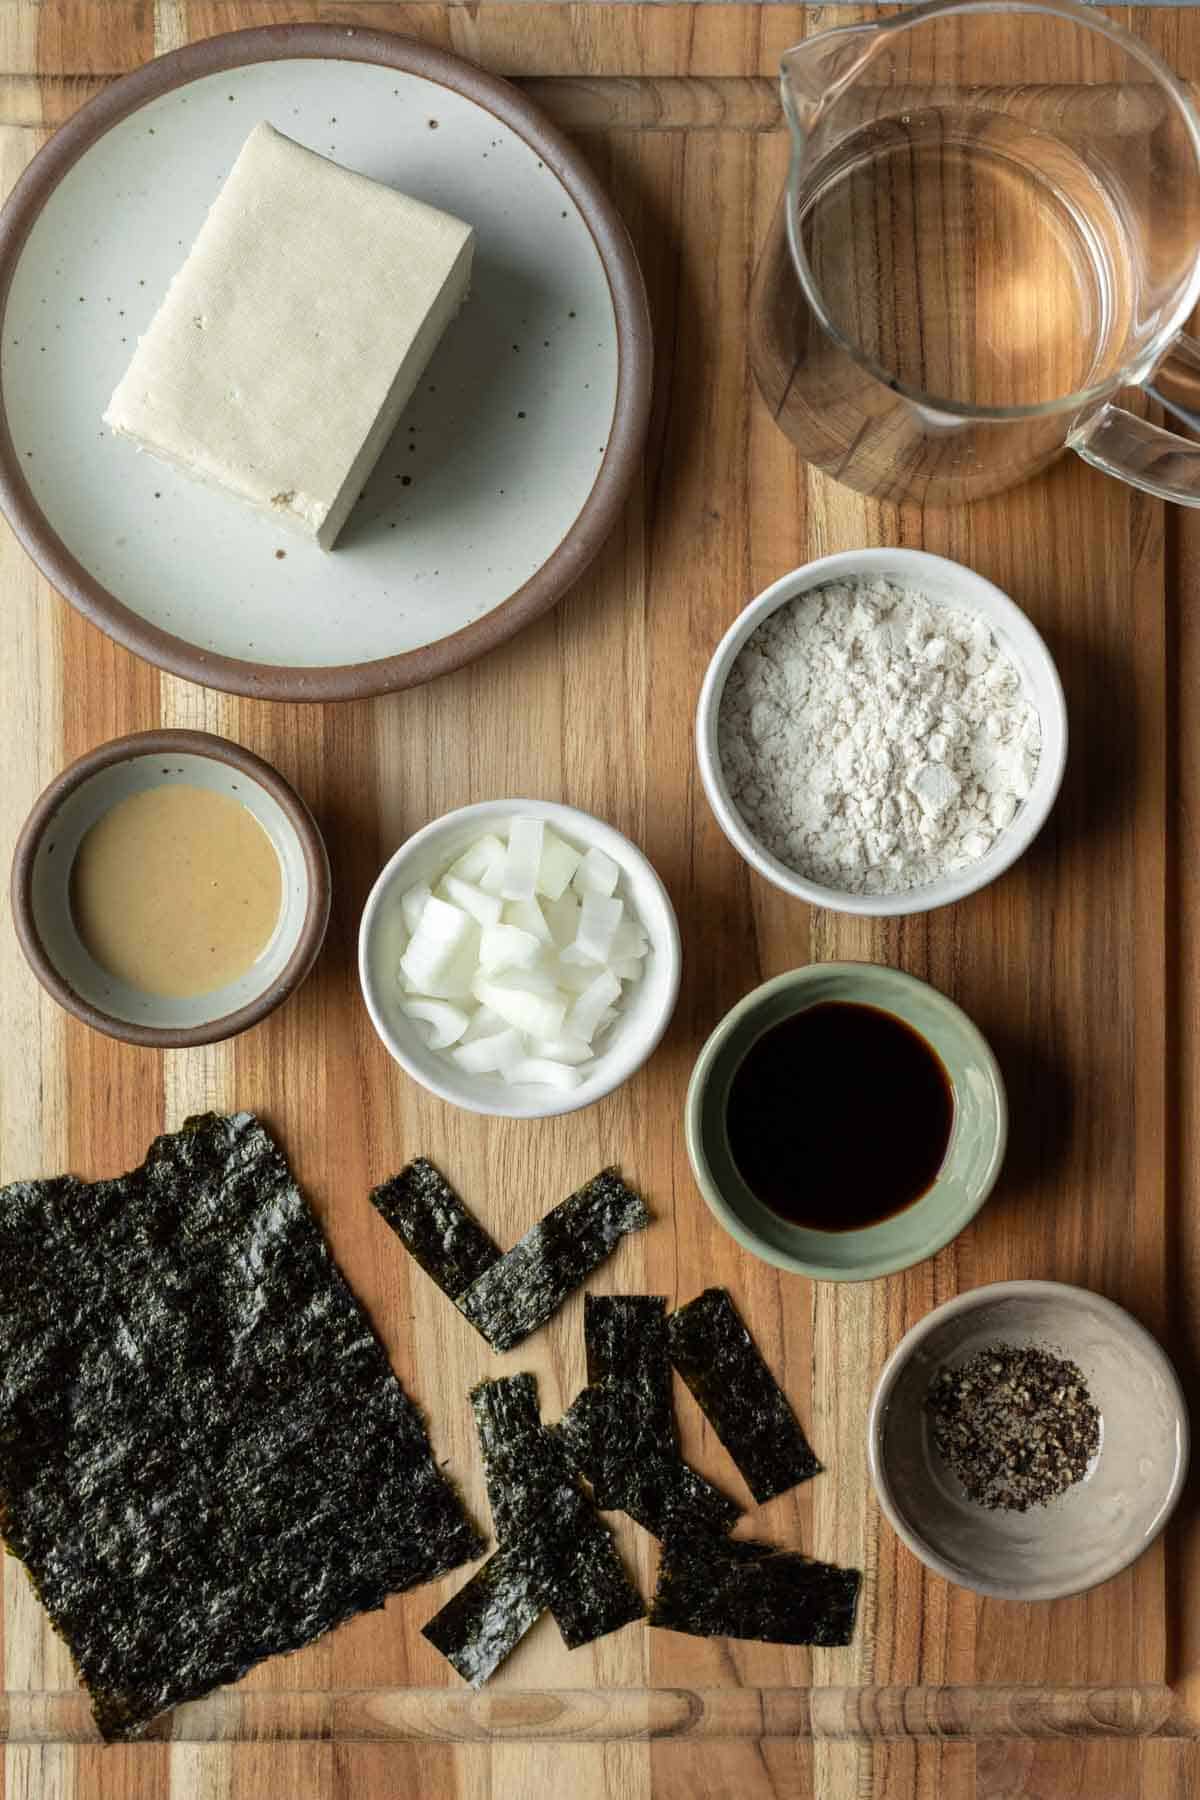 The 7 ingredients needed to make savory tofu pancakes laid out on a wood board.